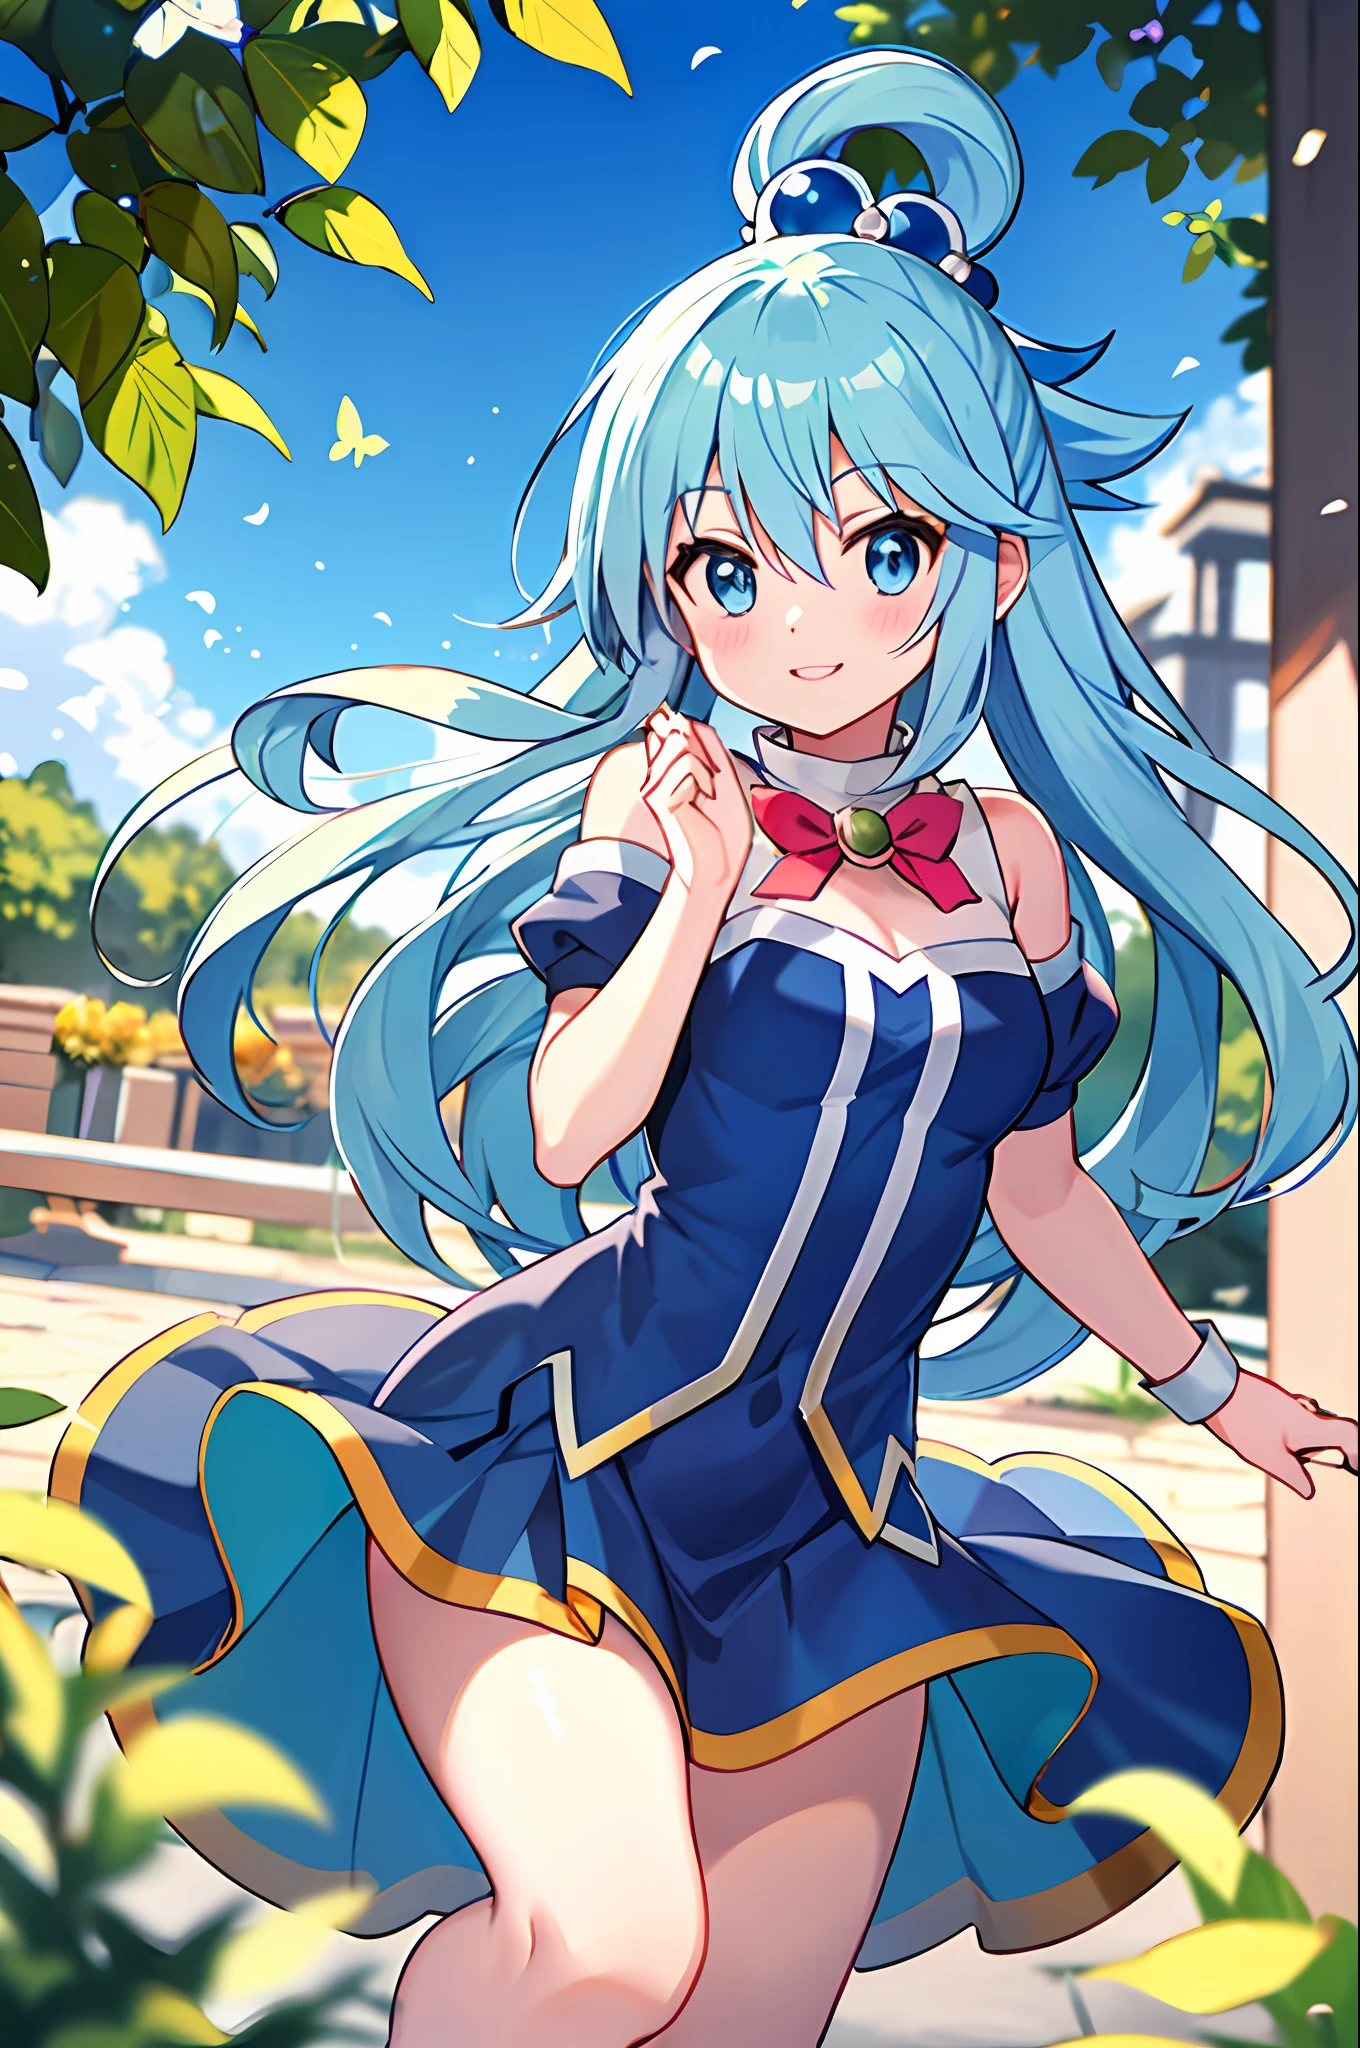 Masterpiece artwork, better_品質,1 (Aqua do anime KonoSuba), standing alone,red fox_ears, blue colored eyes:1.5|blue colored eyes:1.1,(blue hair 1.2|hair light blue), soft hazelnut eyes, flowing wavy hair, ankle socks, gazing at viewer, white stockings, ballet shoes, pastel sundress, fully body, butterfly garden, surrounded by fluttering butterflies, sunlight filtering through the leaves, serene expression, spring time, hands crossed